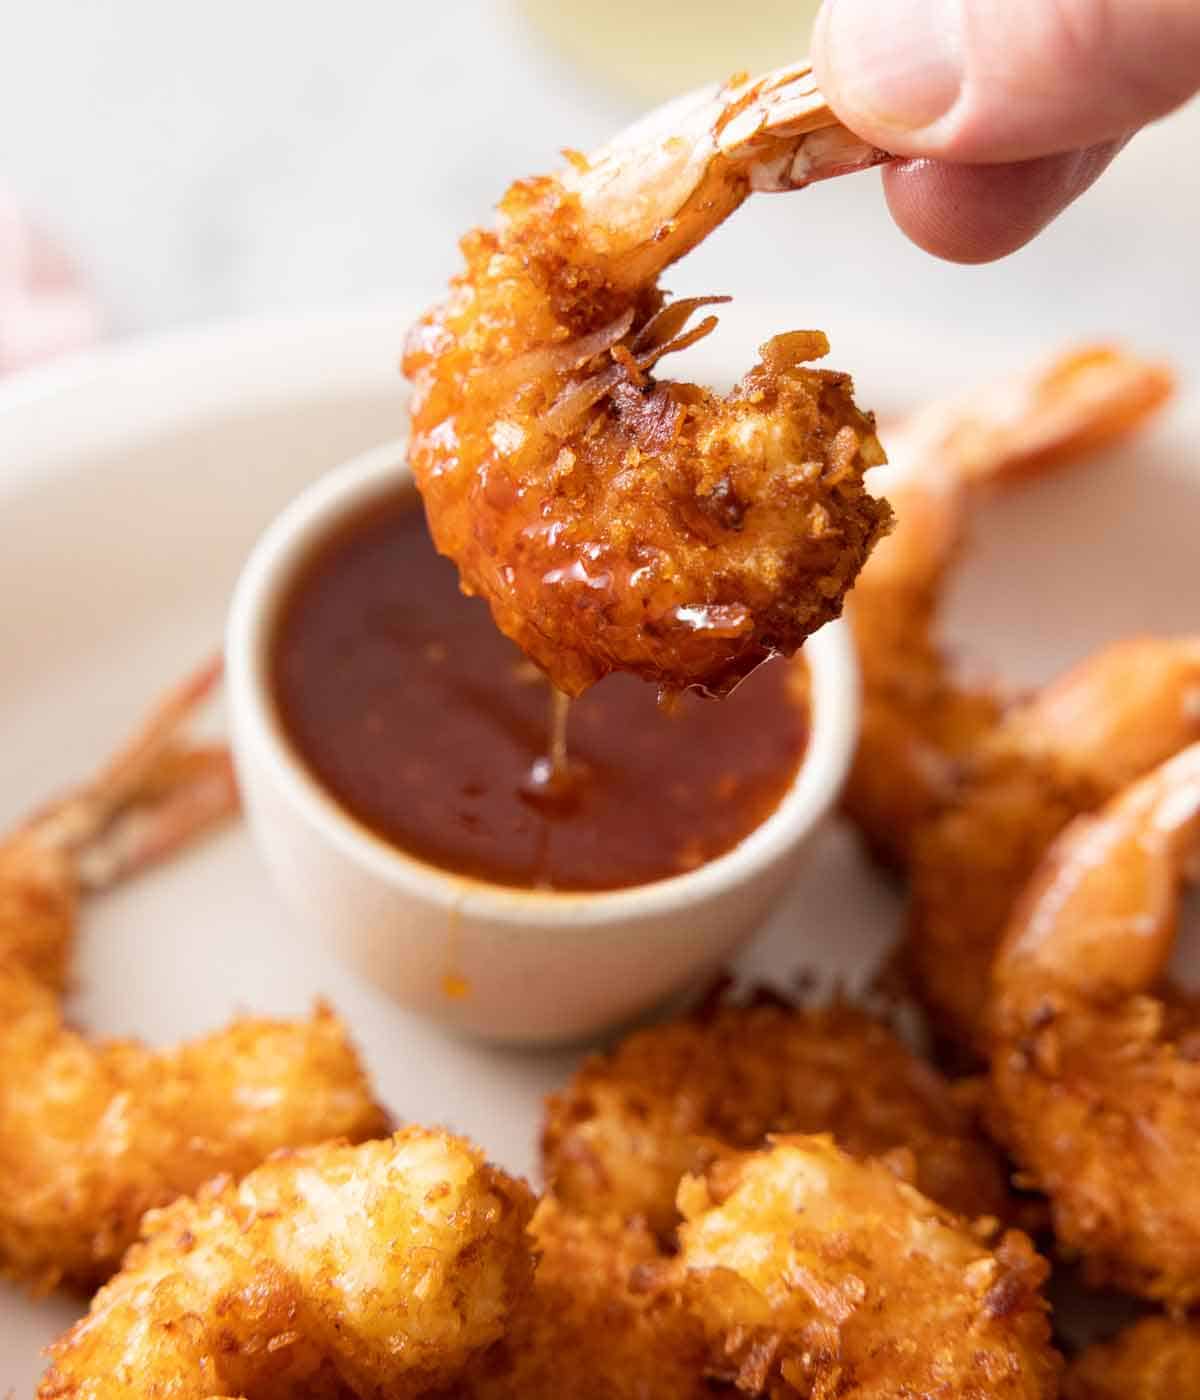 A coconut shrimp dipped into a bowl of sauce and lifted, with some sauce dipping off.